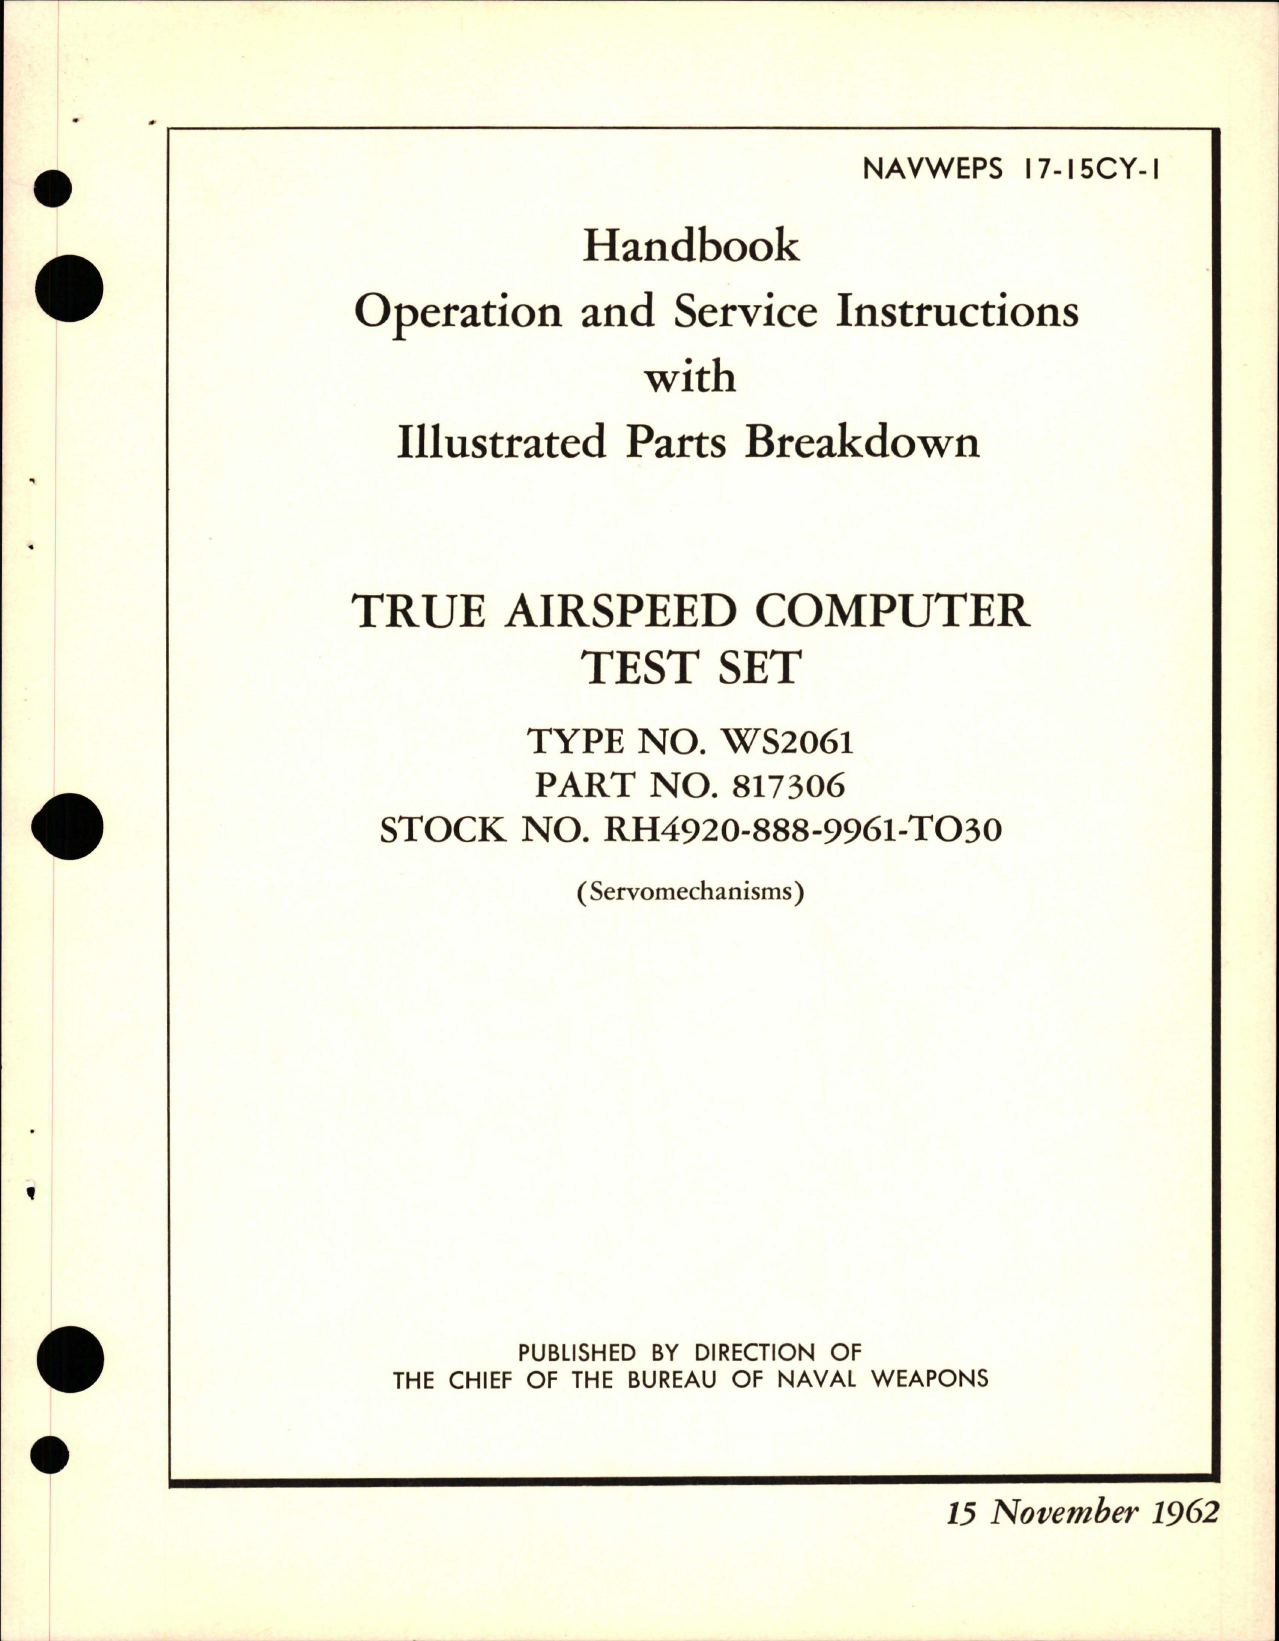 Sample page 1 from AirCorps Library document: Operation and Service Instructions with Illustrated Parts for True Airspeed Computer Test Set - Type WS2061 - Part 817306